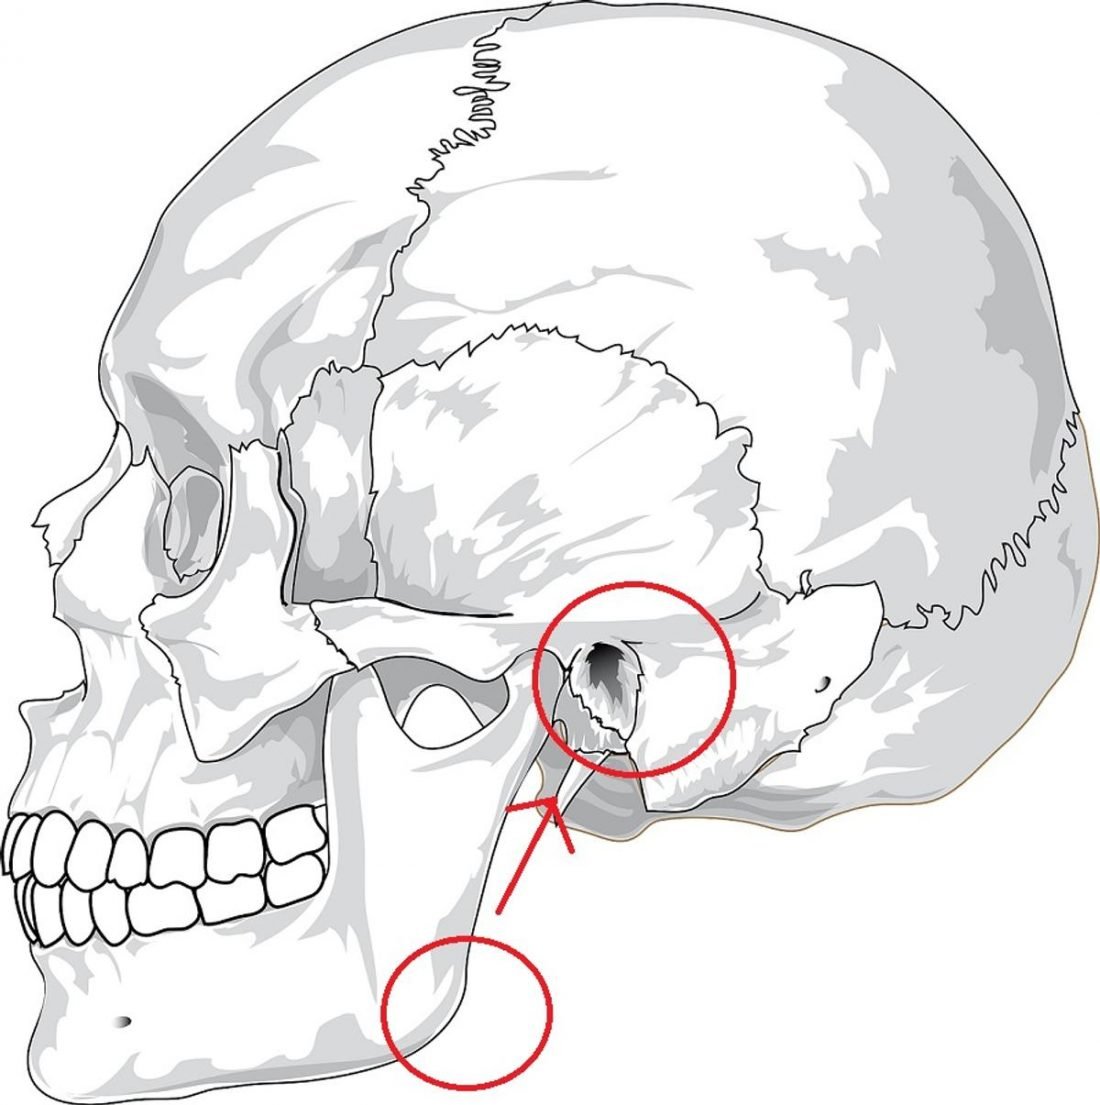 Anatomic illustration of the distance between the ear and the jaw. (From Pixabay)